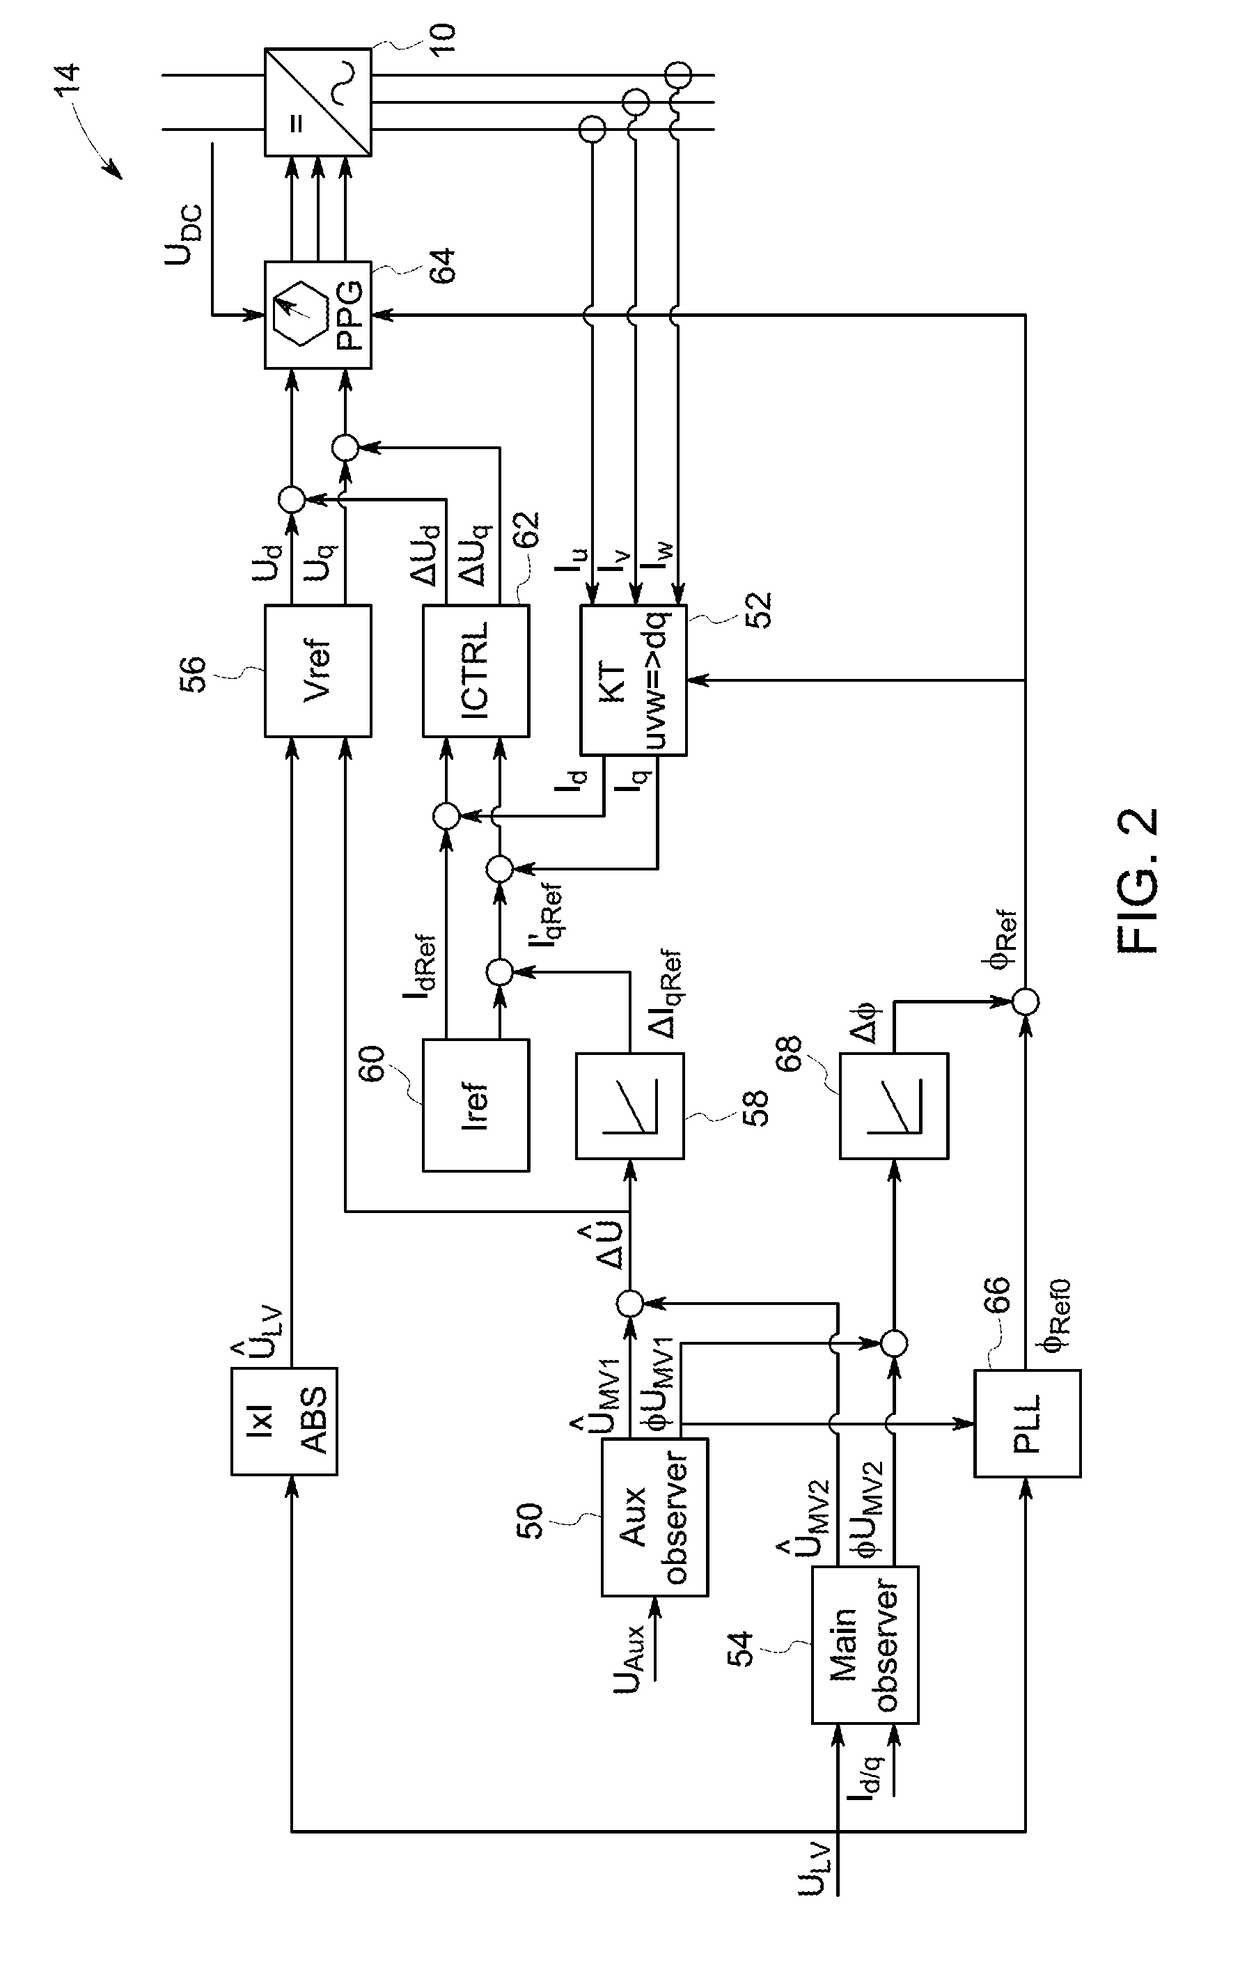 Electric circuits and power systems incorporating the same